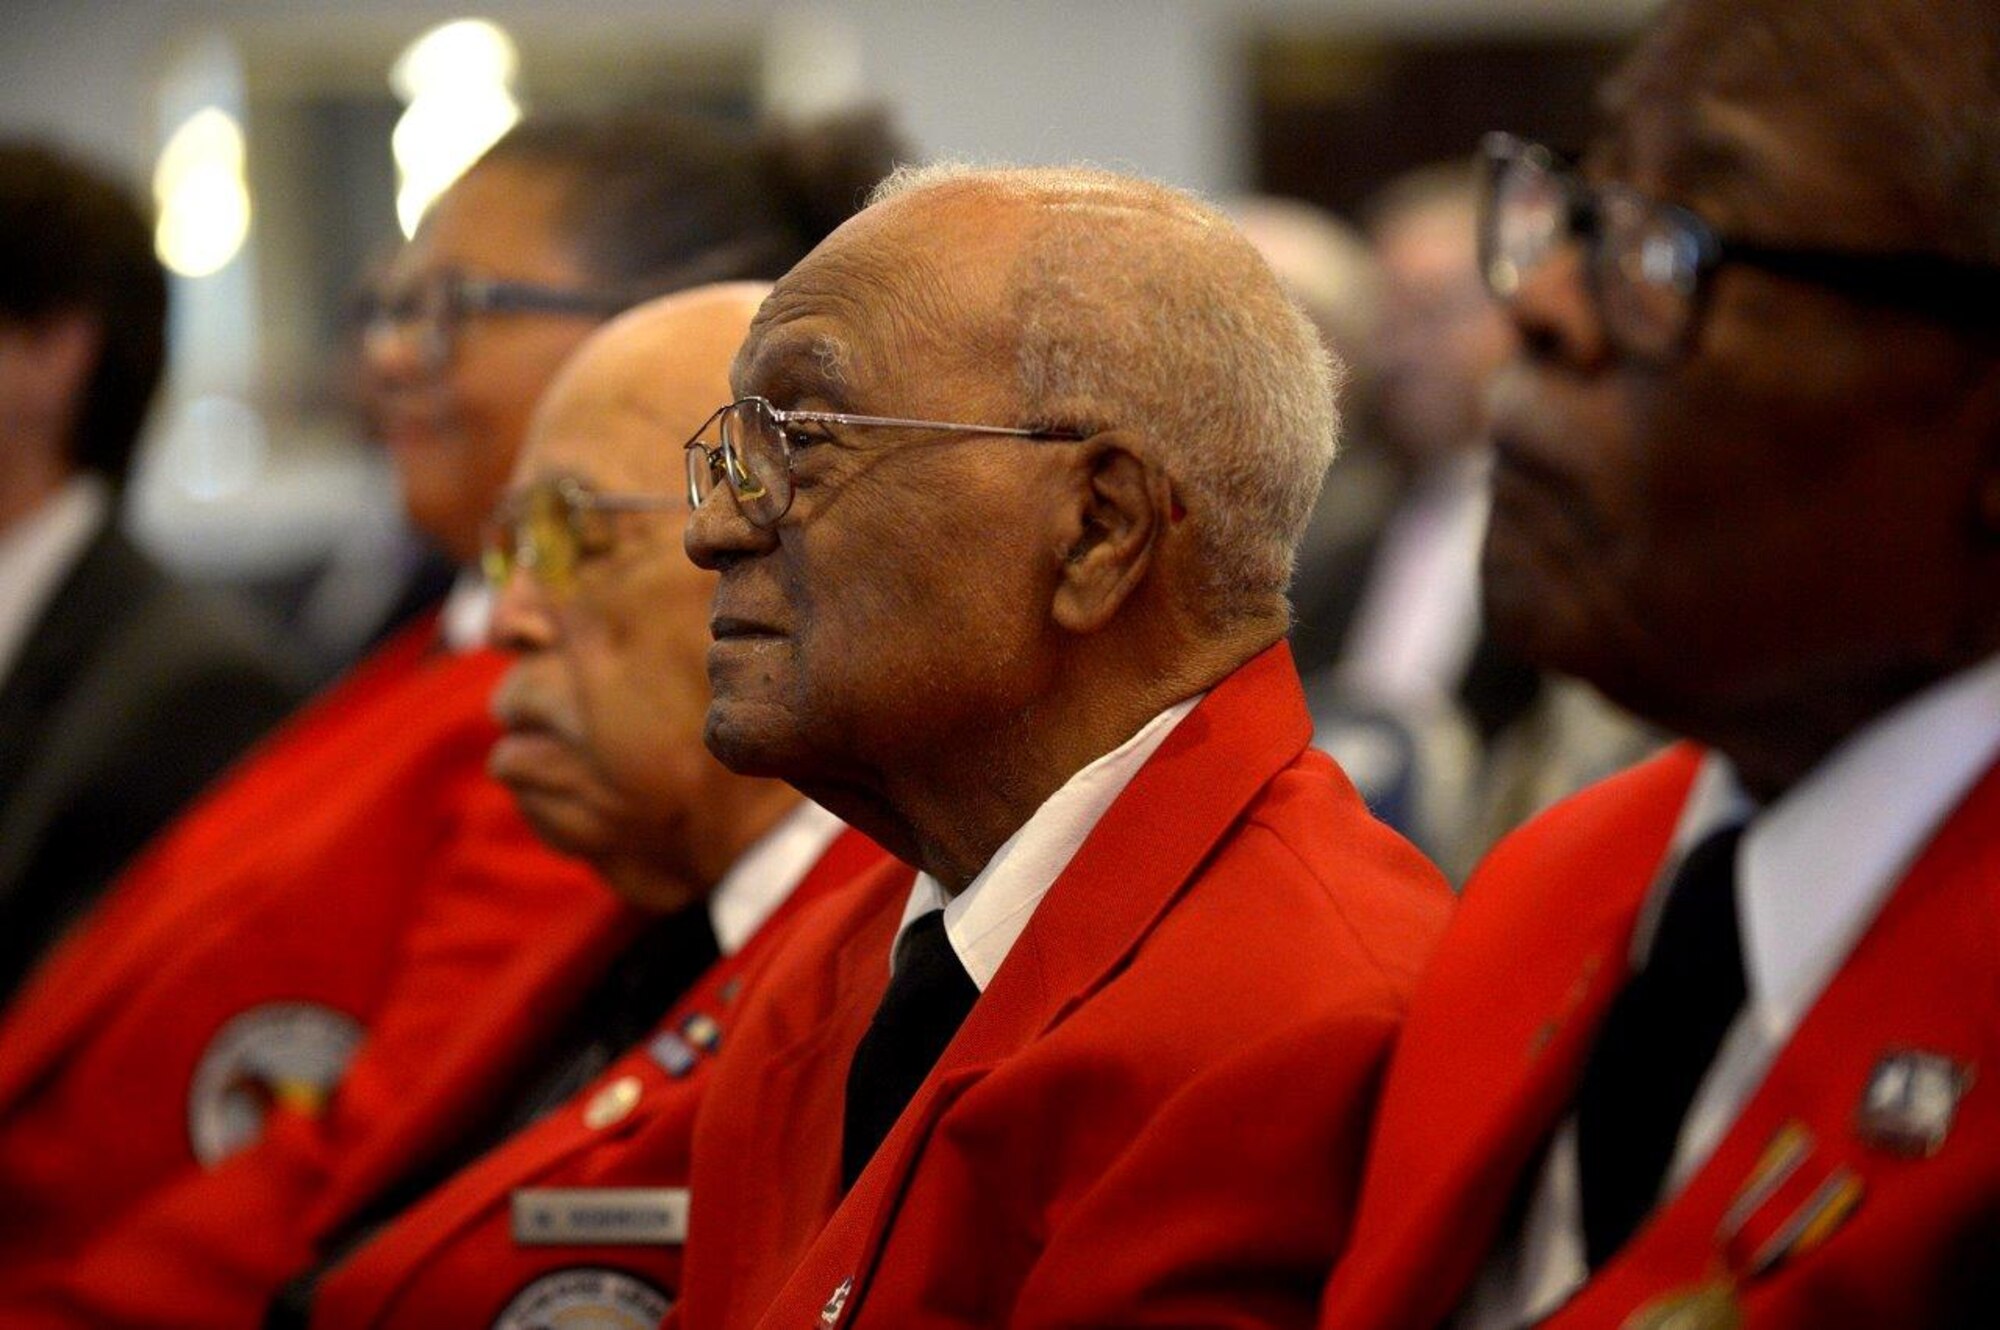 Tuskegee Airmen listen to former Secretary of the Air Force Deborah Lee James during a portrait unveiling ceremony at Joint Base Anacostia-Bolling, Washington, D.C., April 6, 2018. During her remarks, James spoke about how both past and present Airmen have influenced her career. (U.S. Air Force photo by Staff Sgt. Rusty Frank)